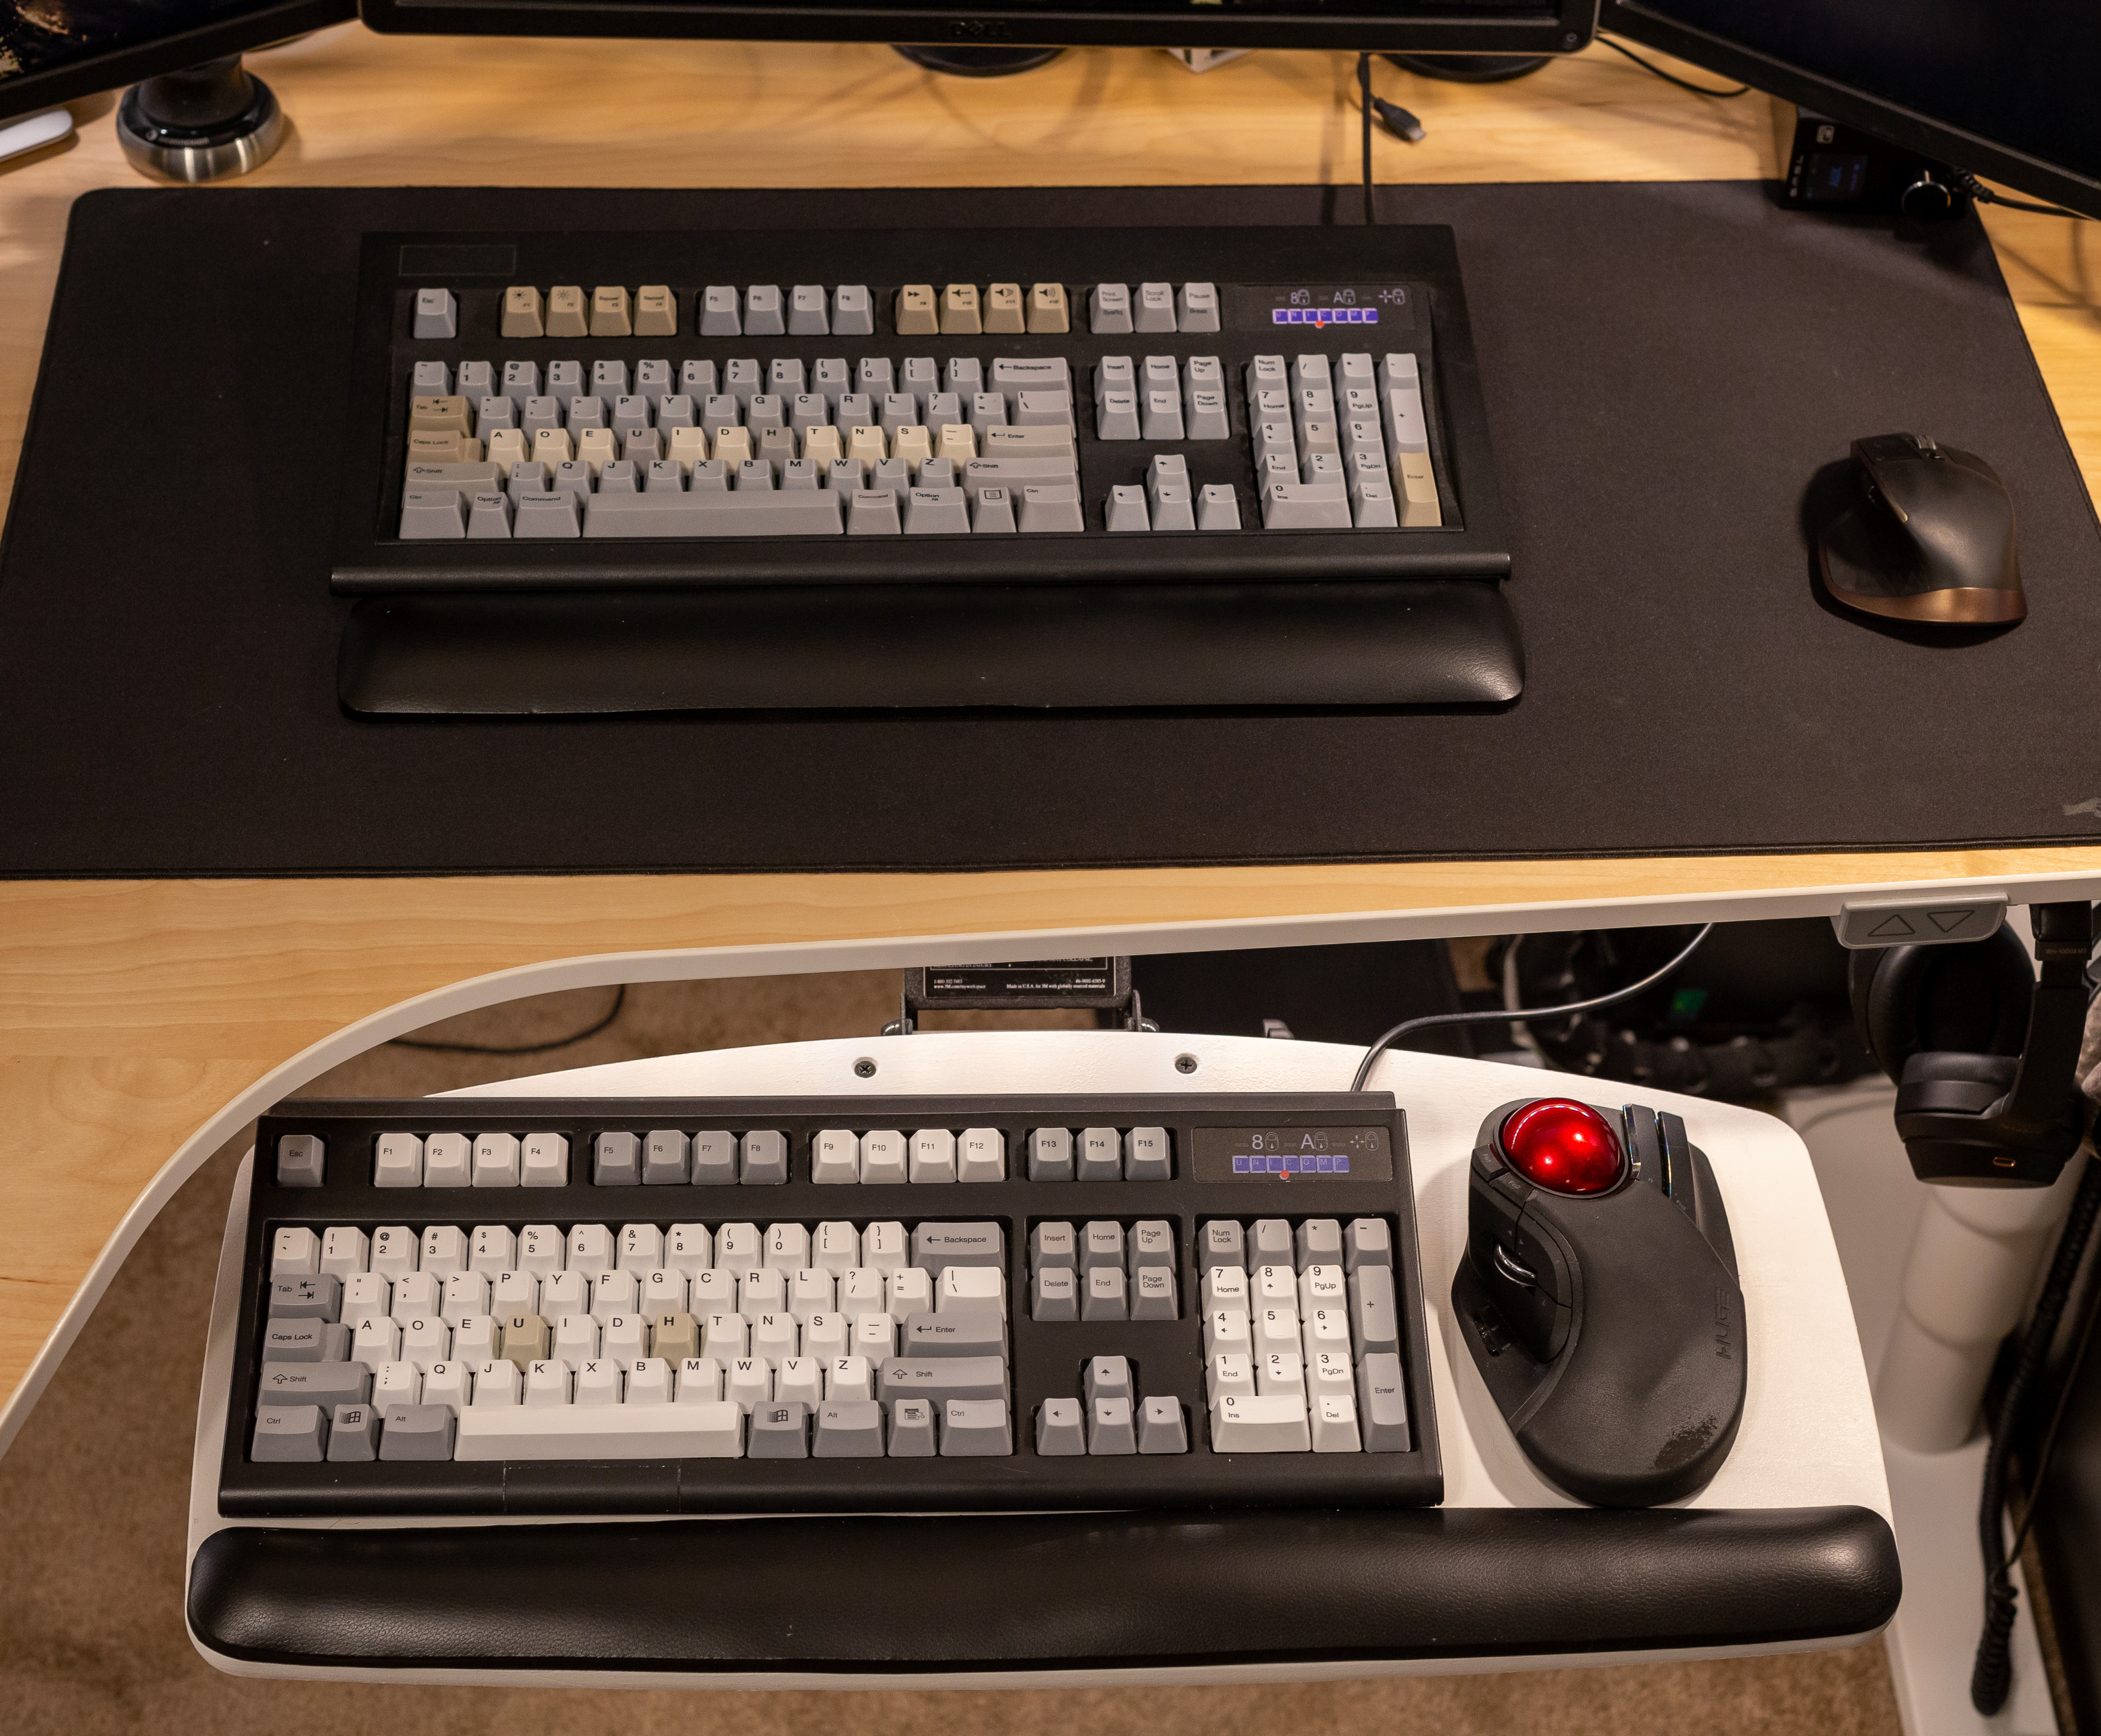 Keyboards on desk and keyboard tray